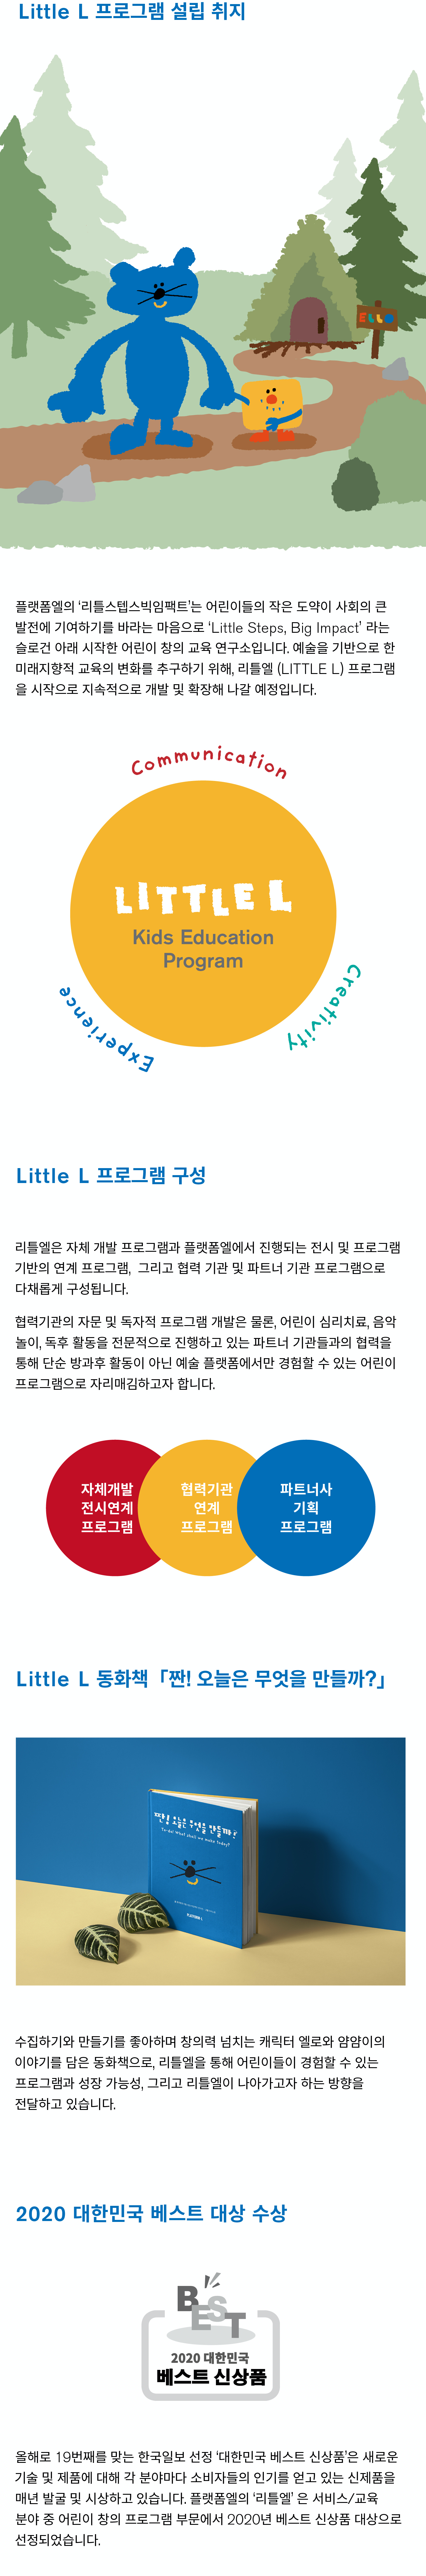 about_little